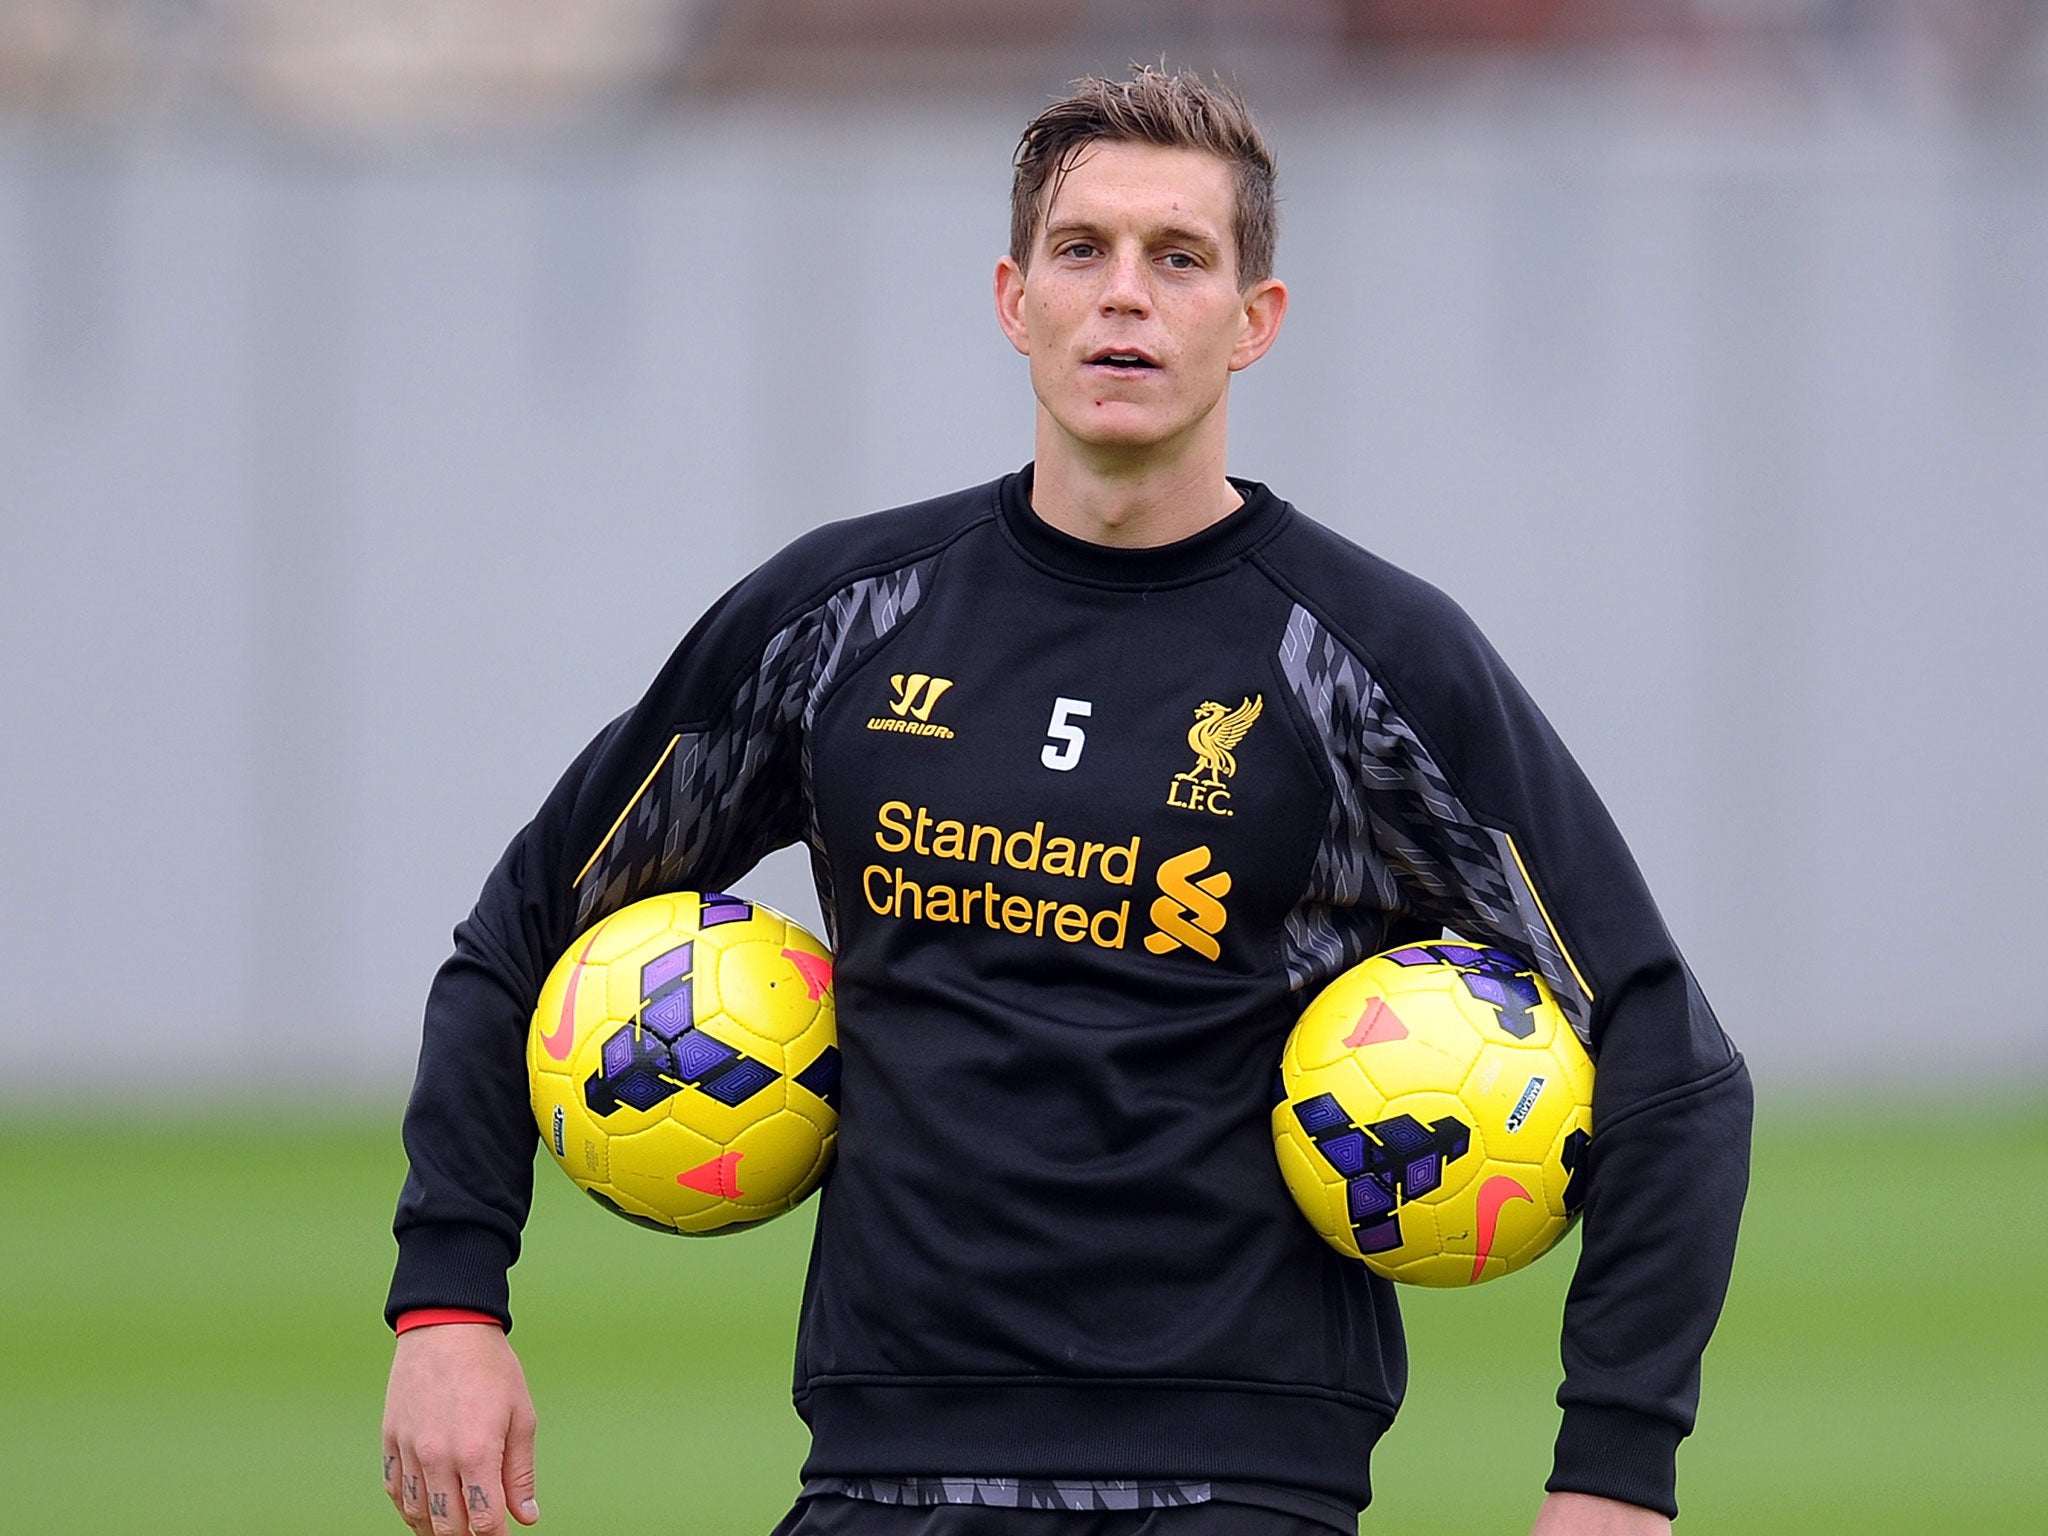 Daniel Agger in action during training with Liverpool